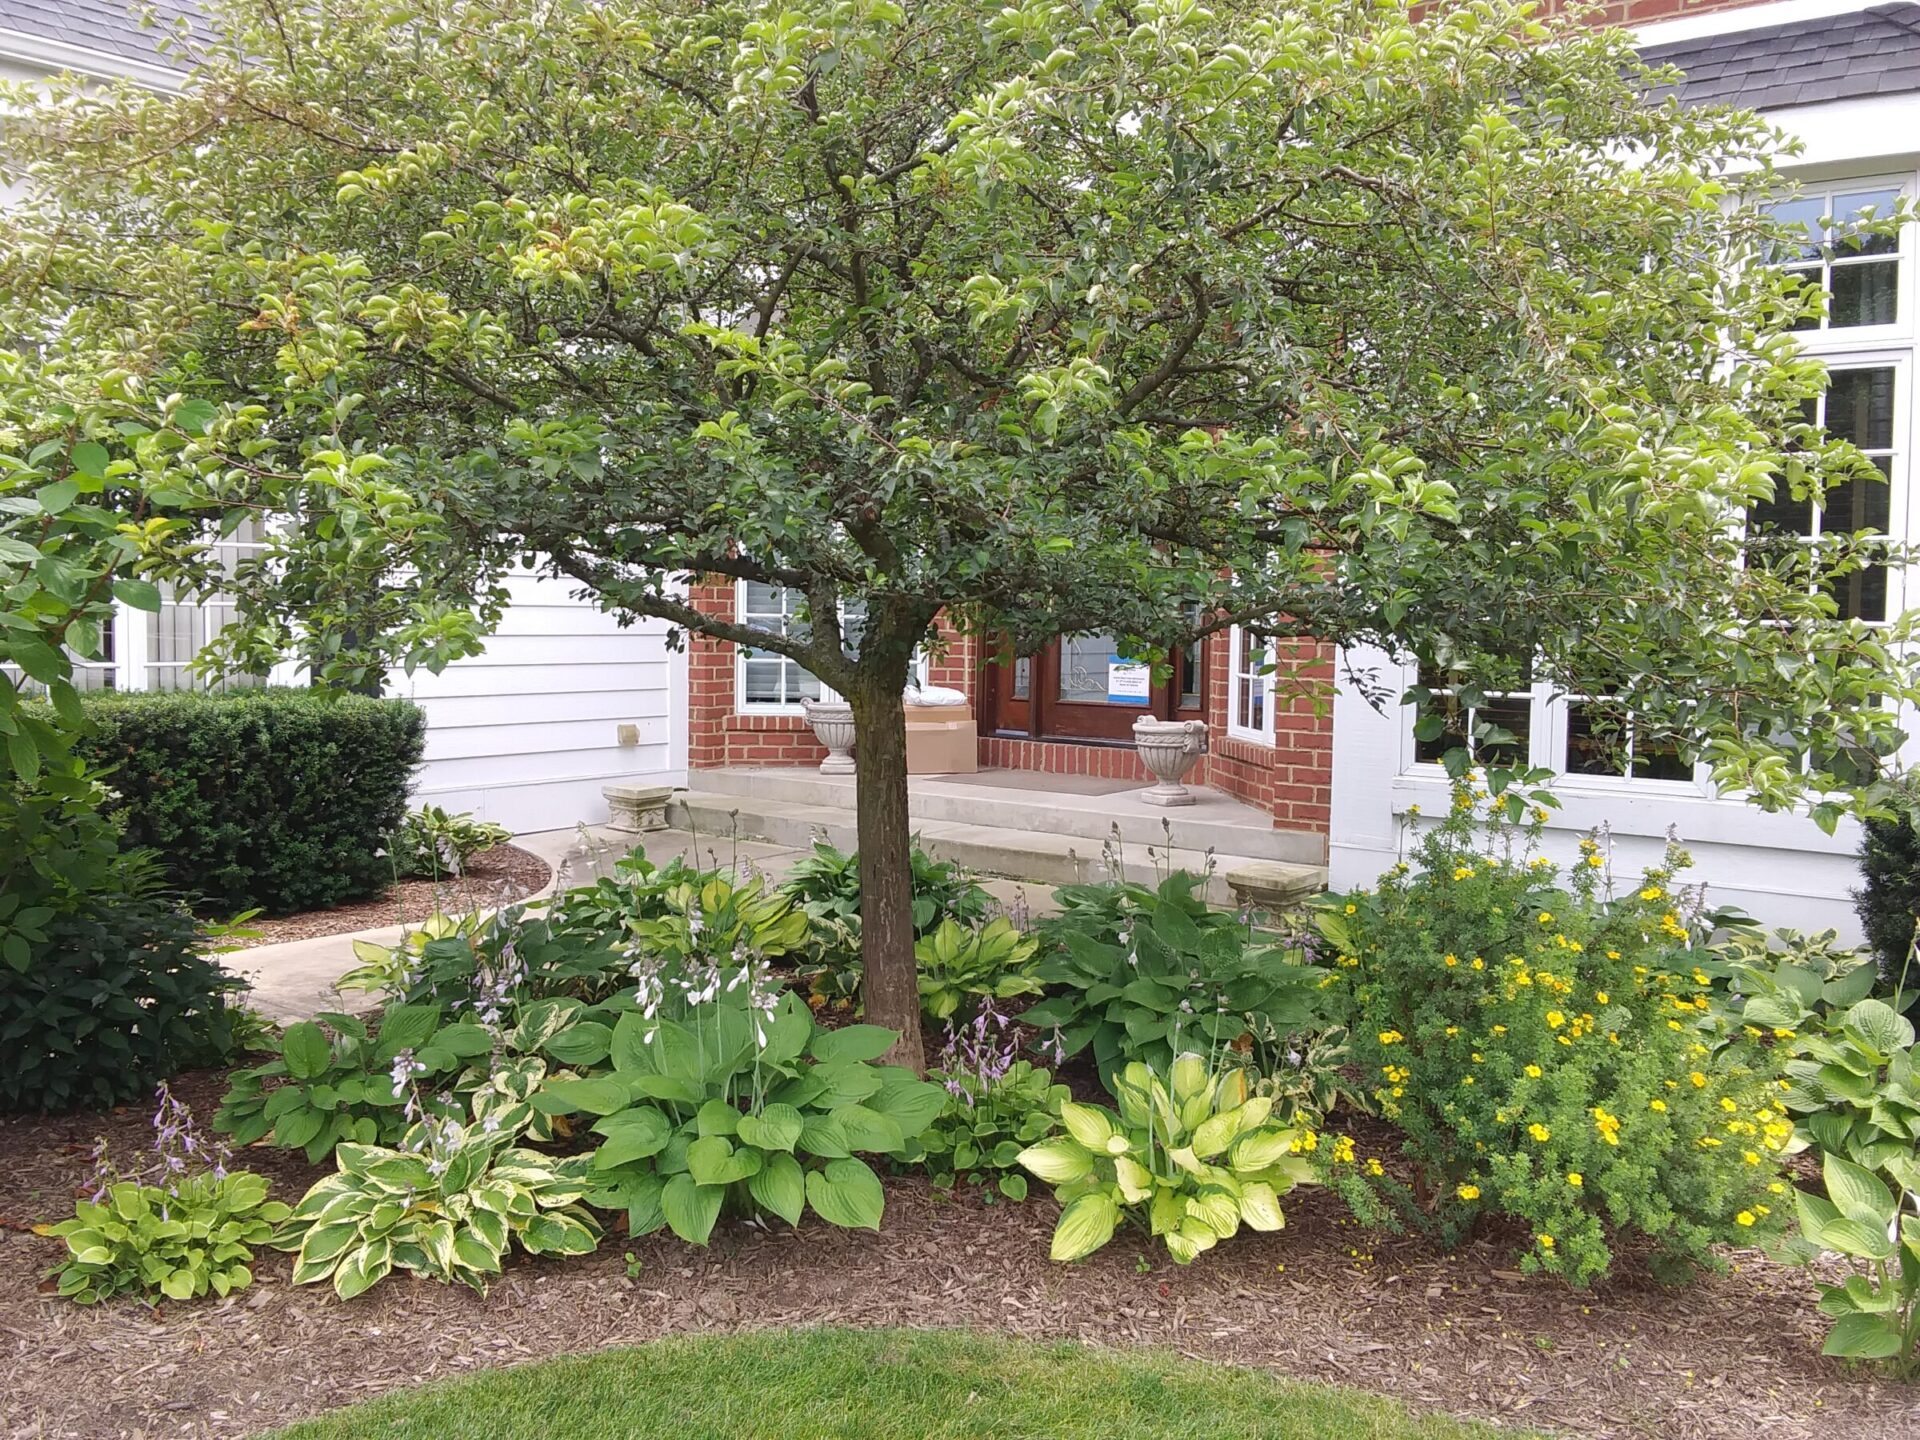 The image shows a lush garden in front of a house with a tree, flowering plants, mulch, and a walkway leading to a white porch.